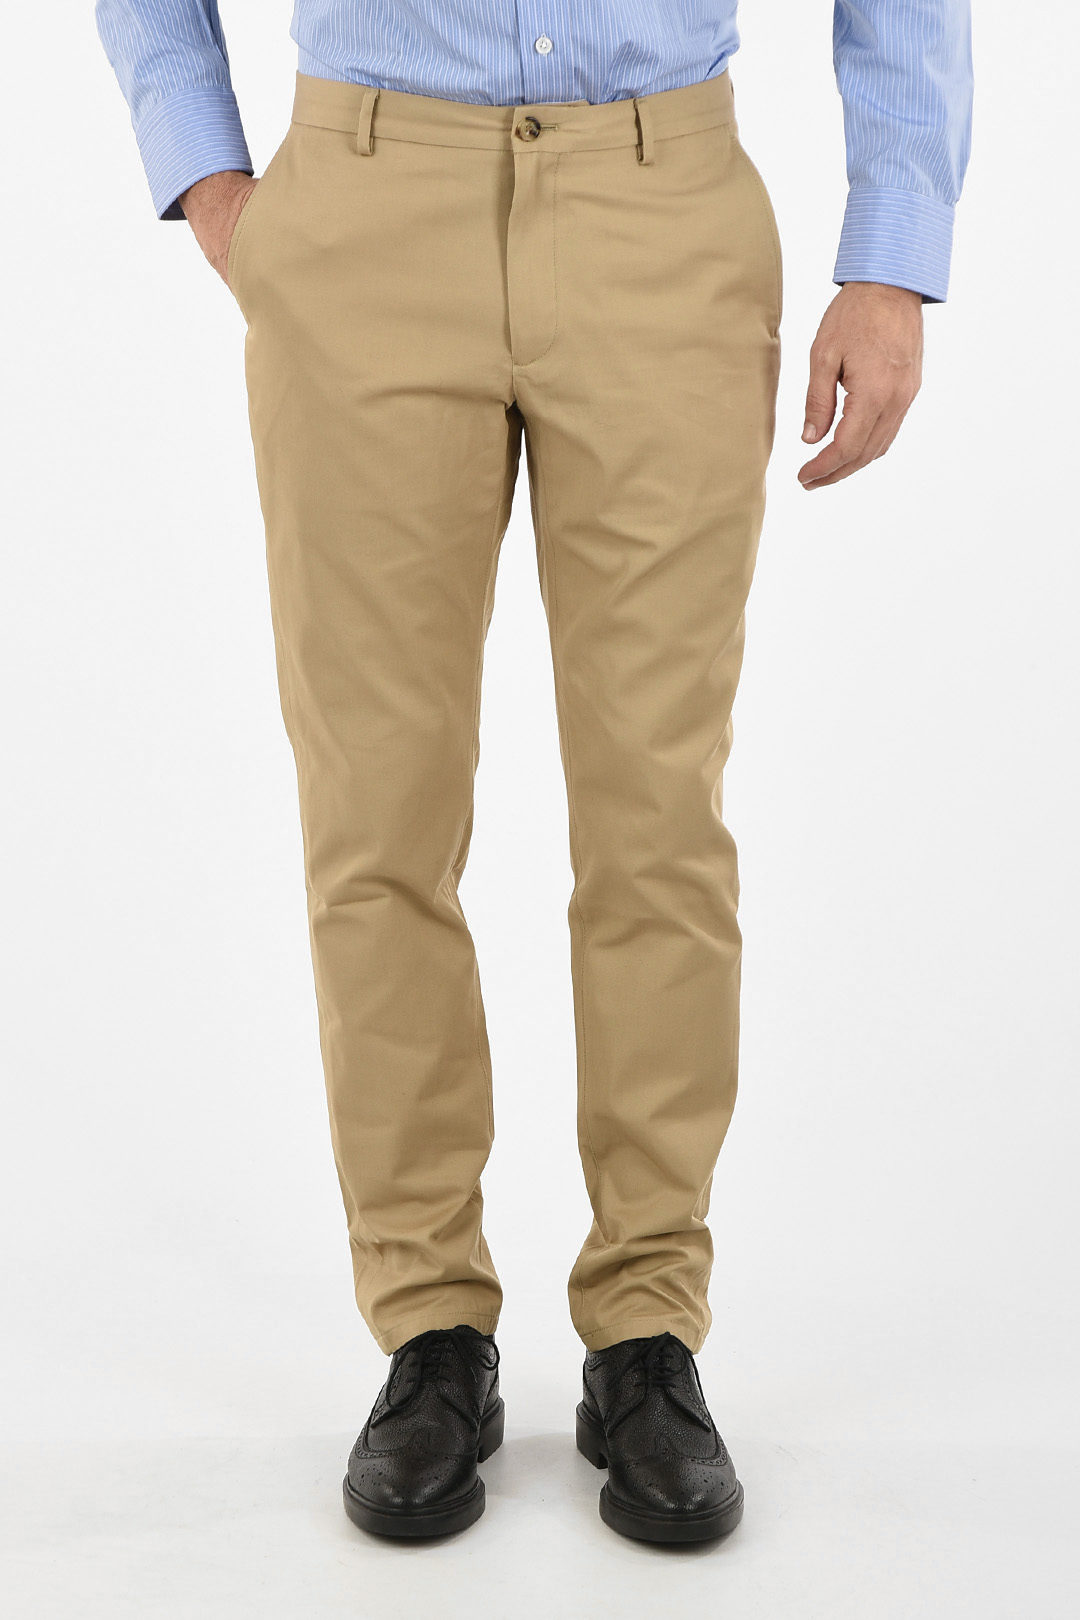 Burberry Chino Pant men - Glamood Outlet